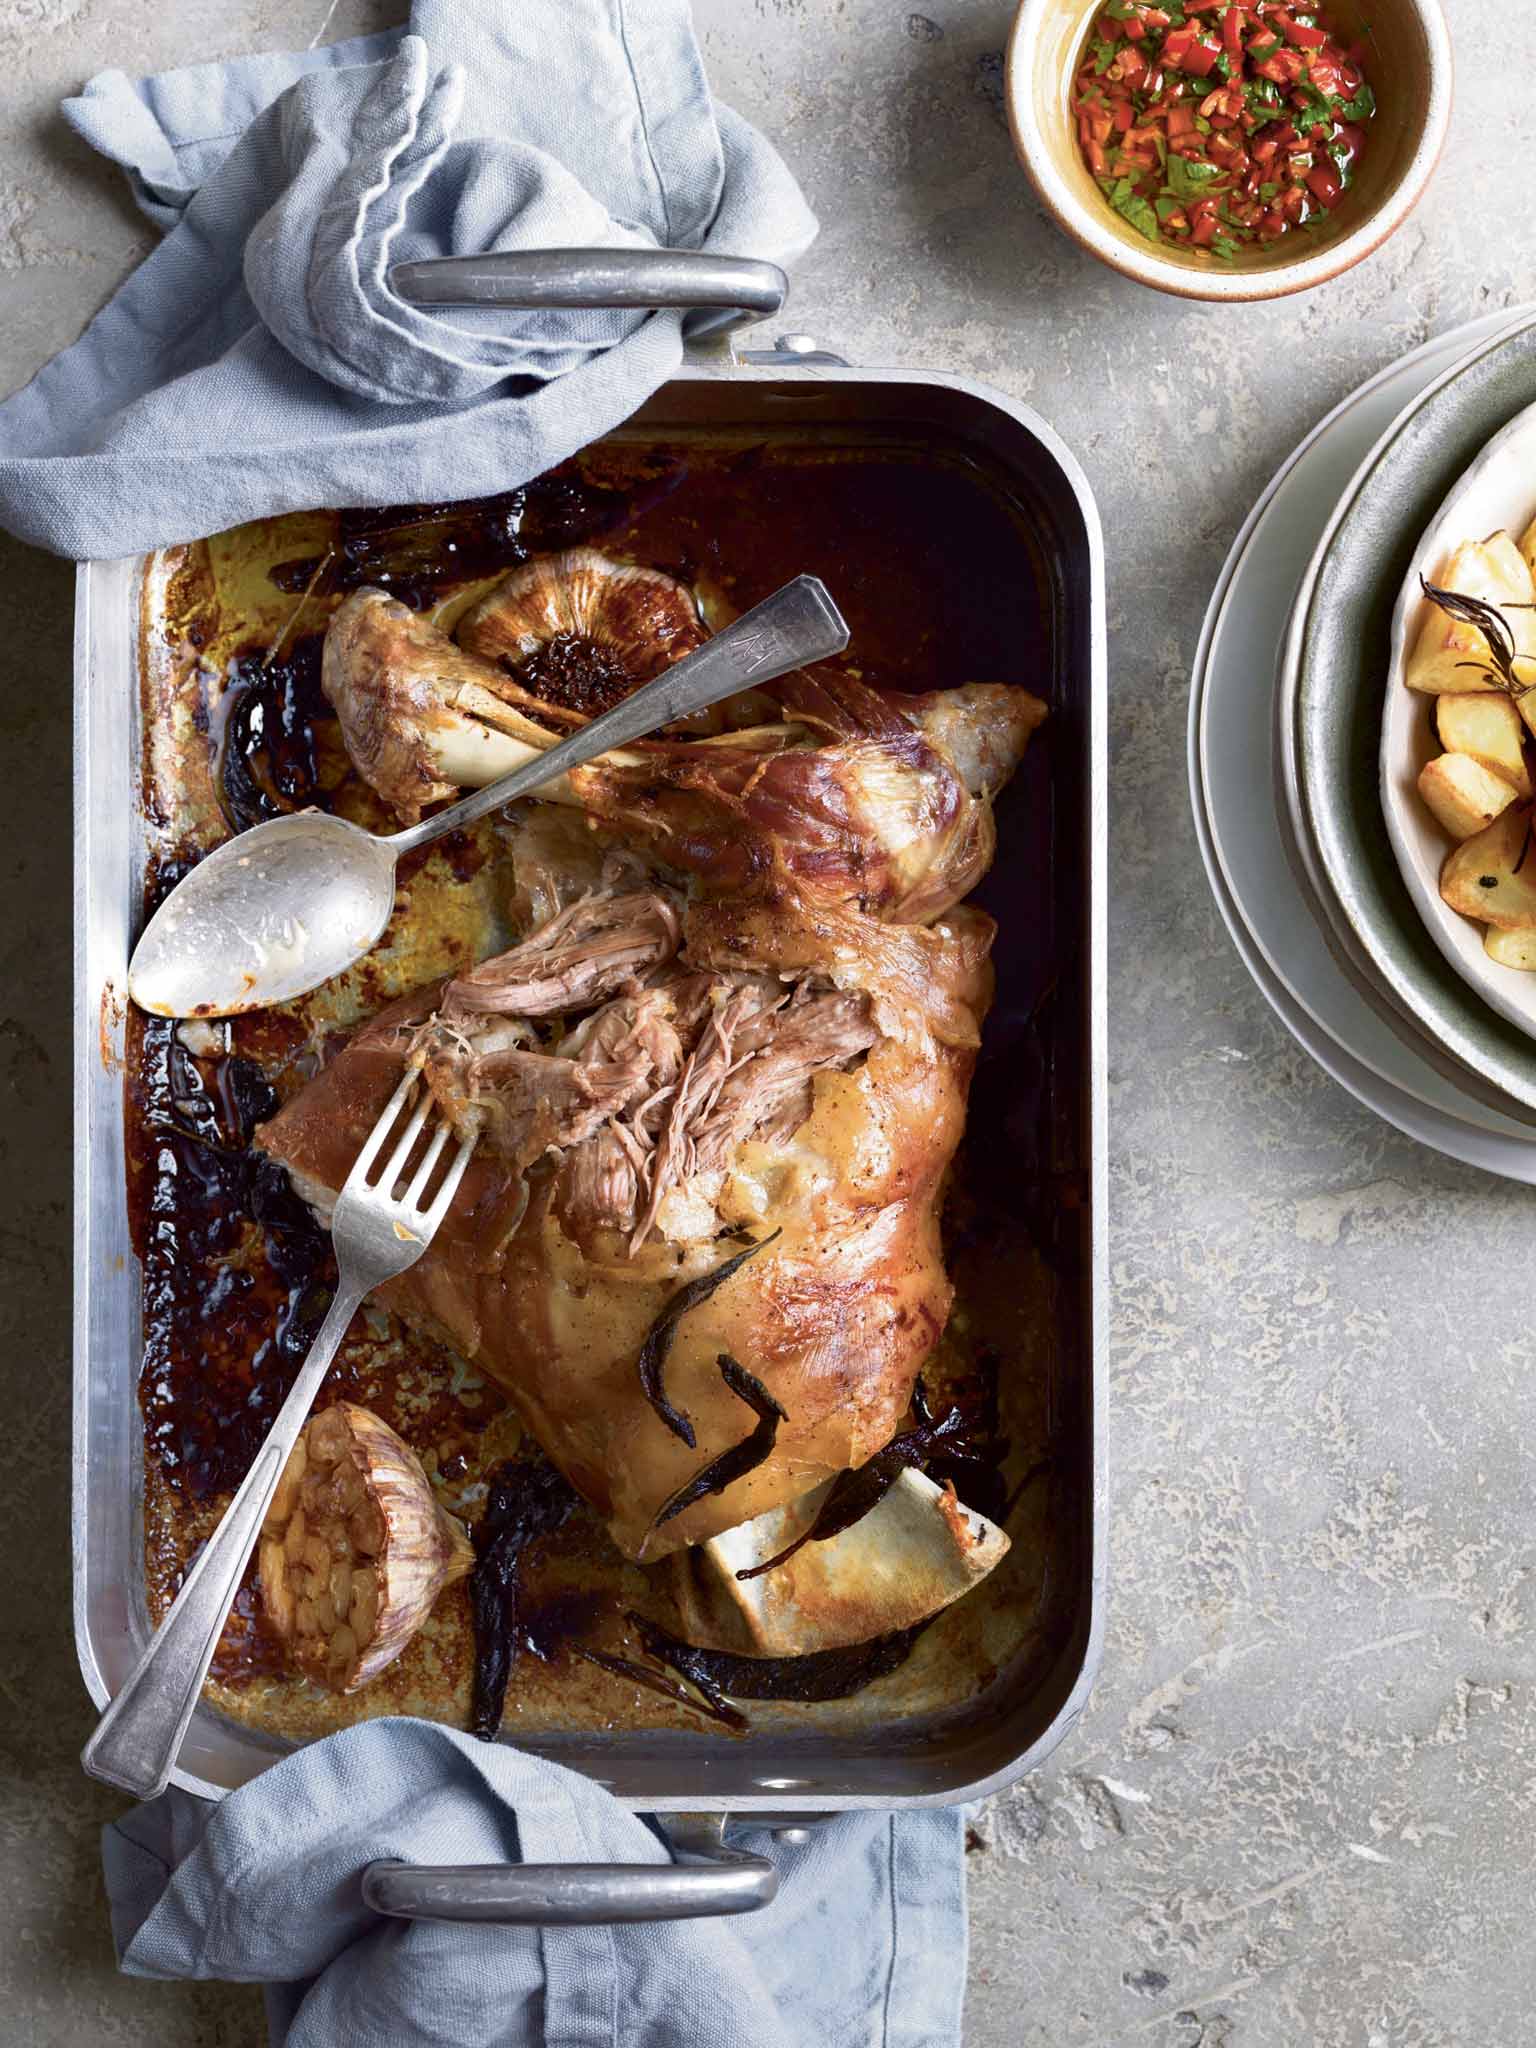 Slow-roasted lamb shoulder with rosemary potatoes and chilli relish